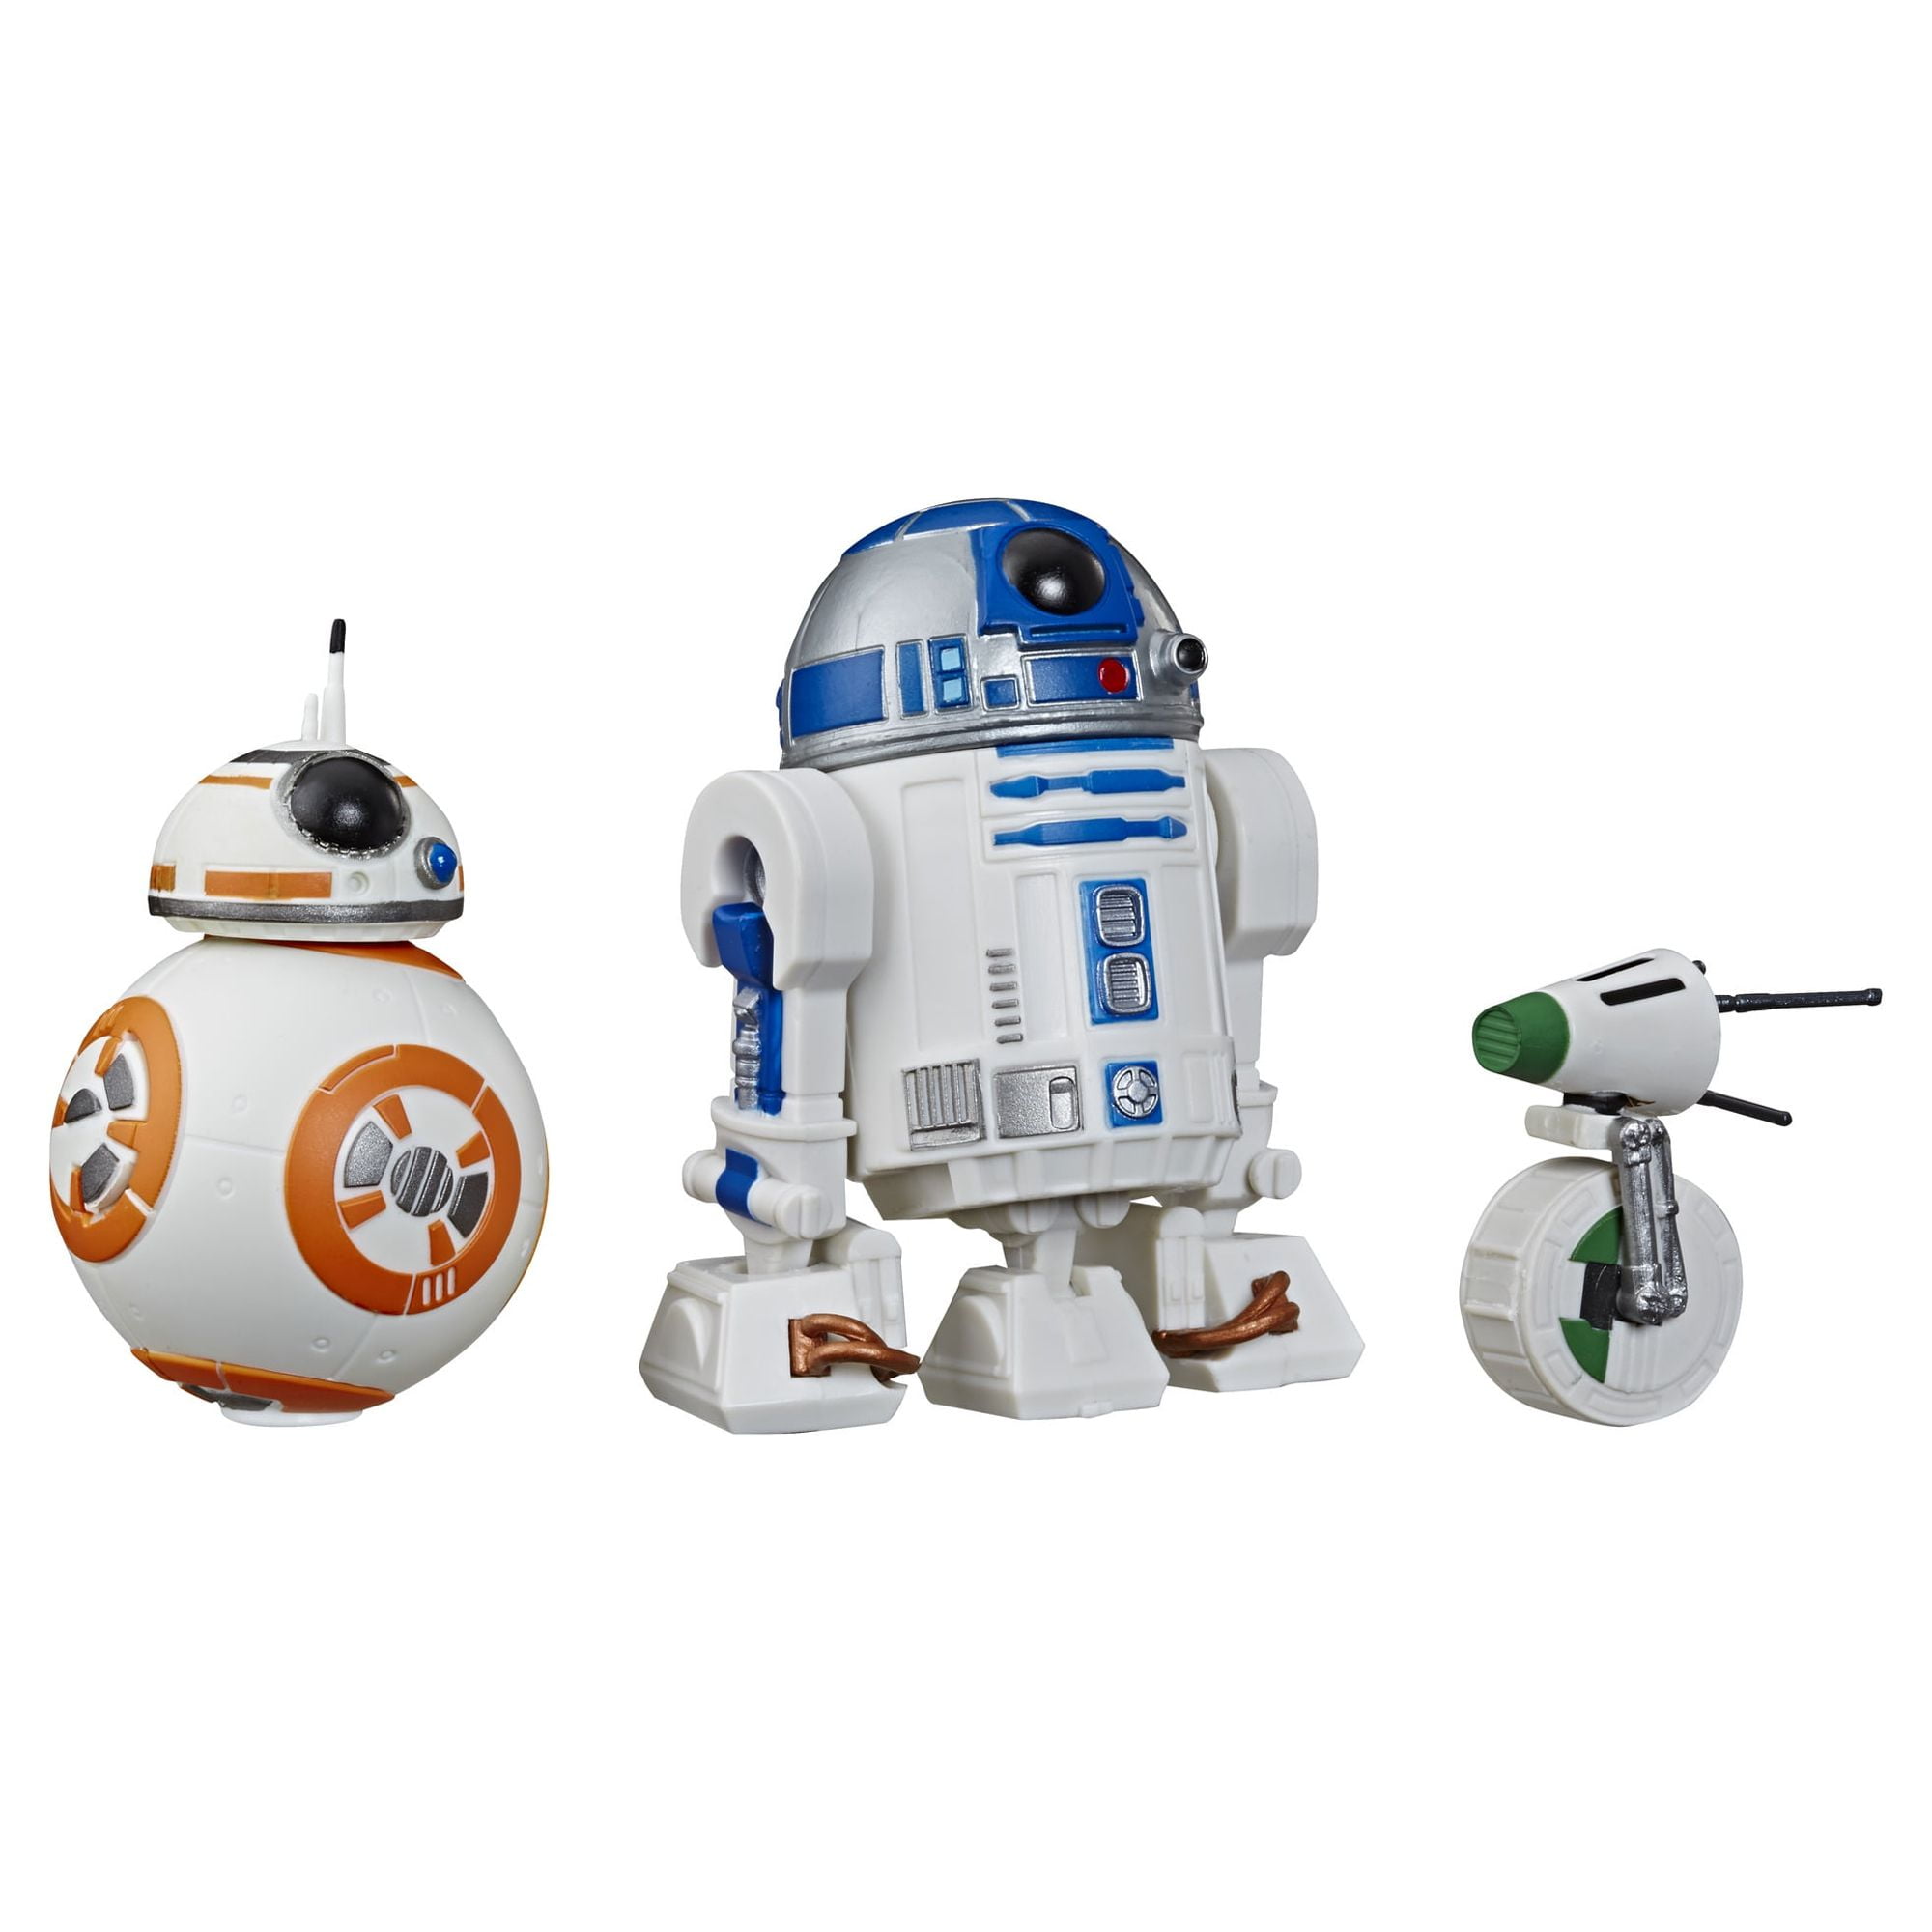  STAR WARS Galaxy of Adventures R2-D2, BB-8, D-O Action Figure 3  Pack, 5 Scale Droid Toys with Fun Action Features, Kids Ages 4 & Up : Toys  & Games